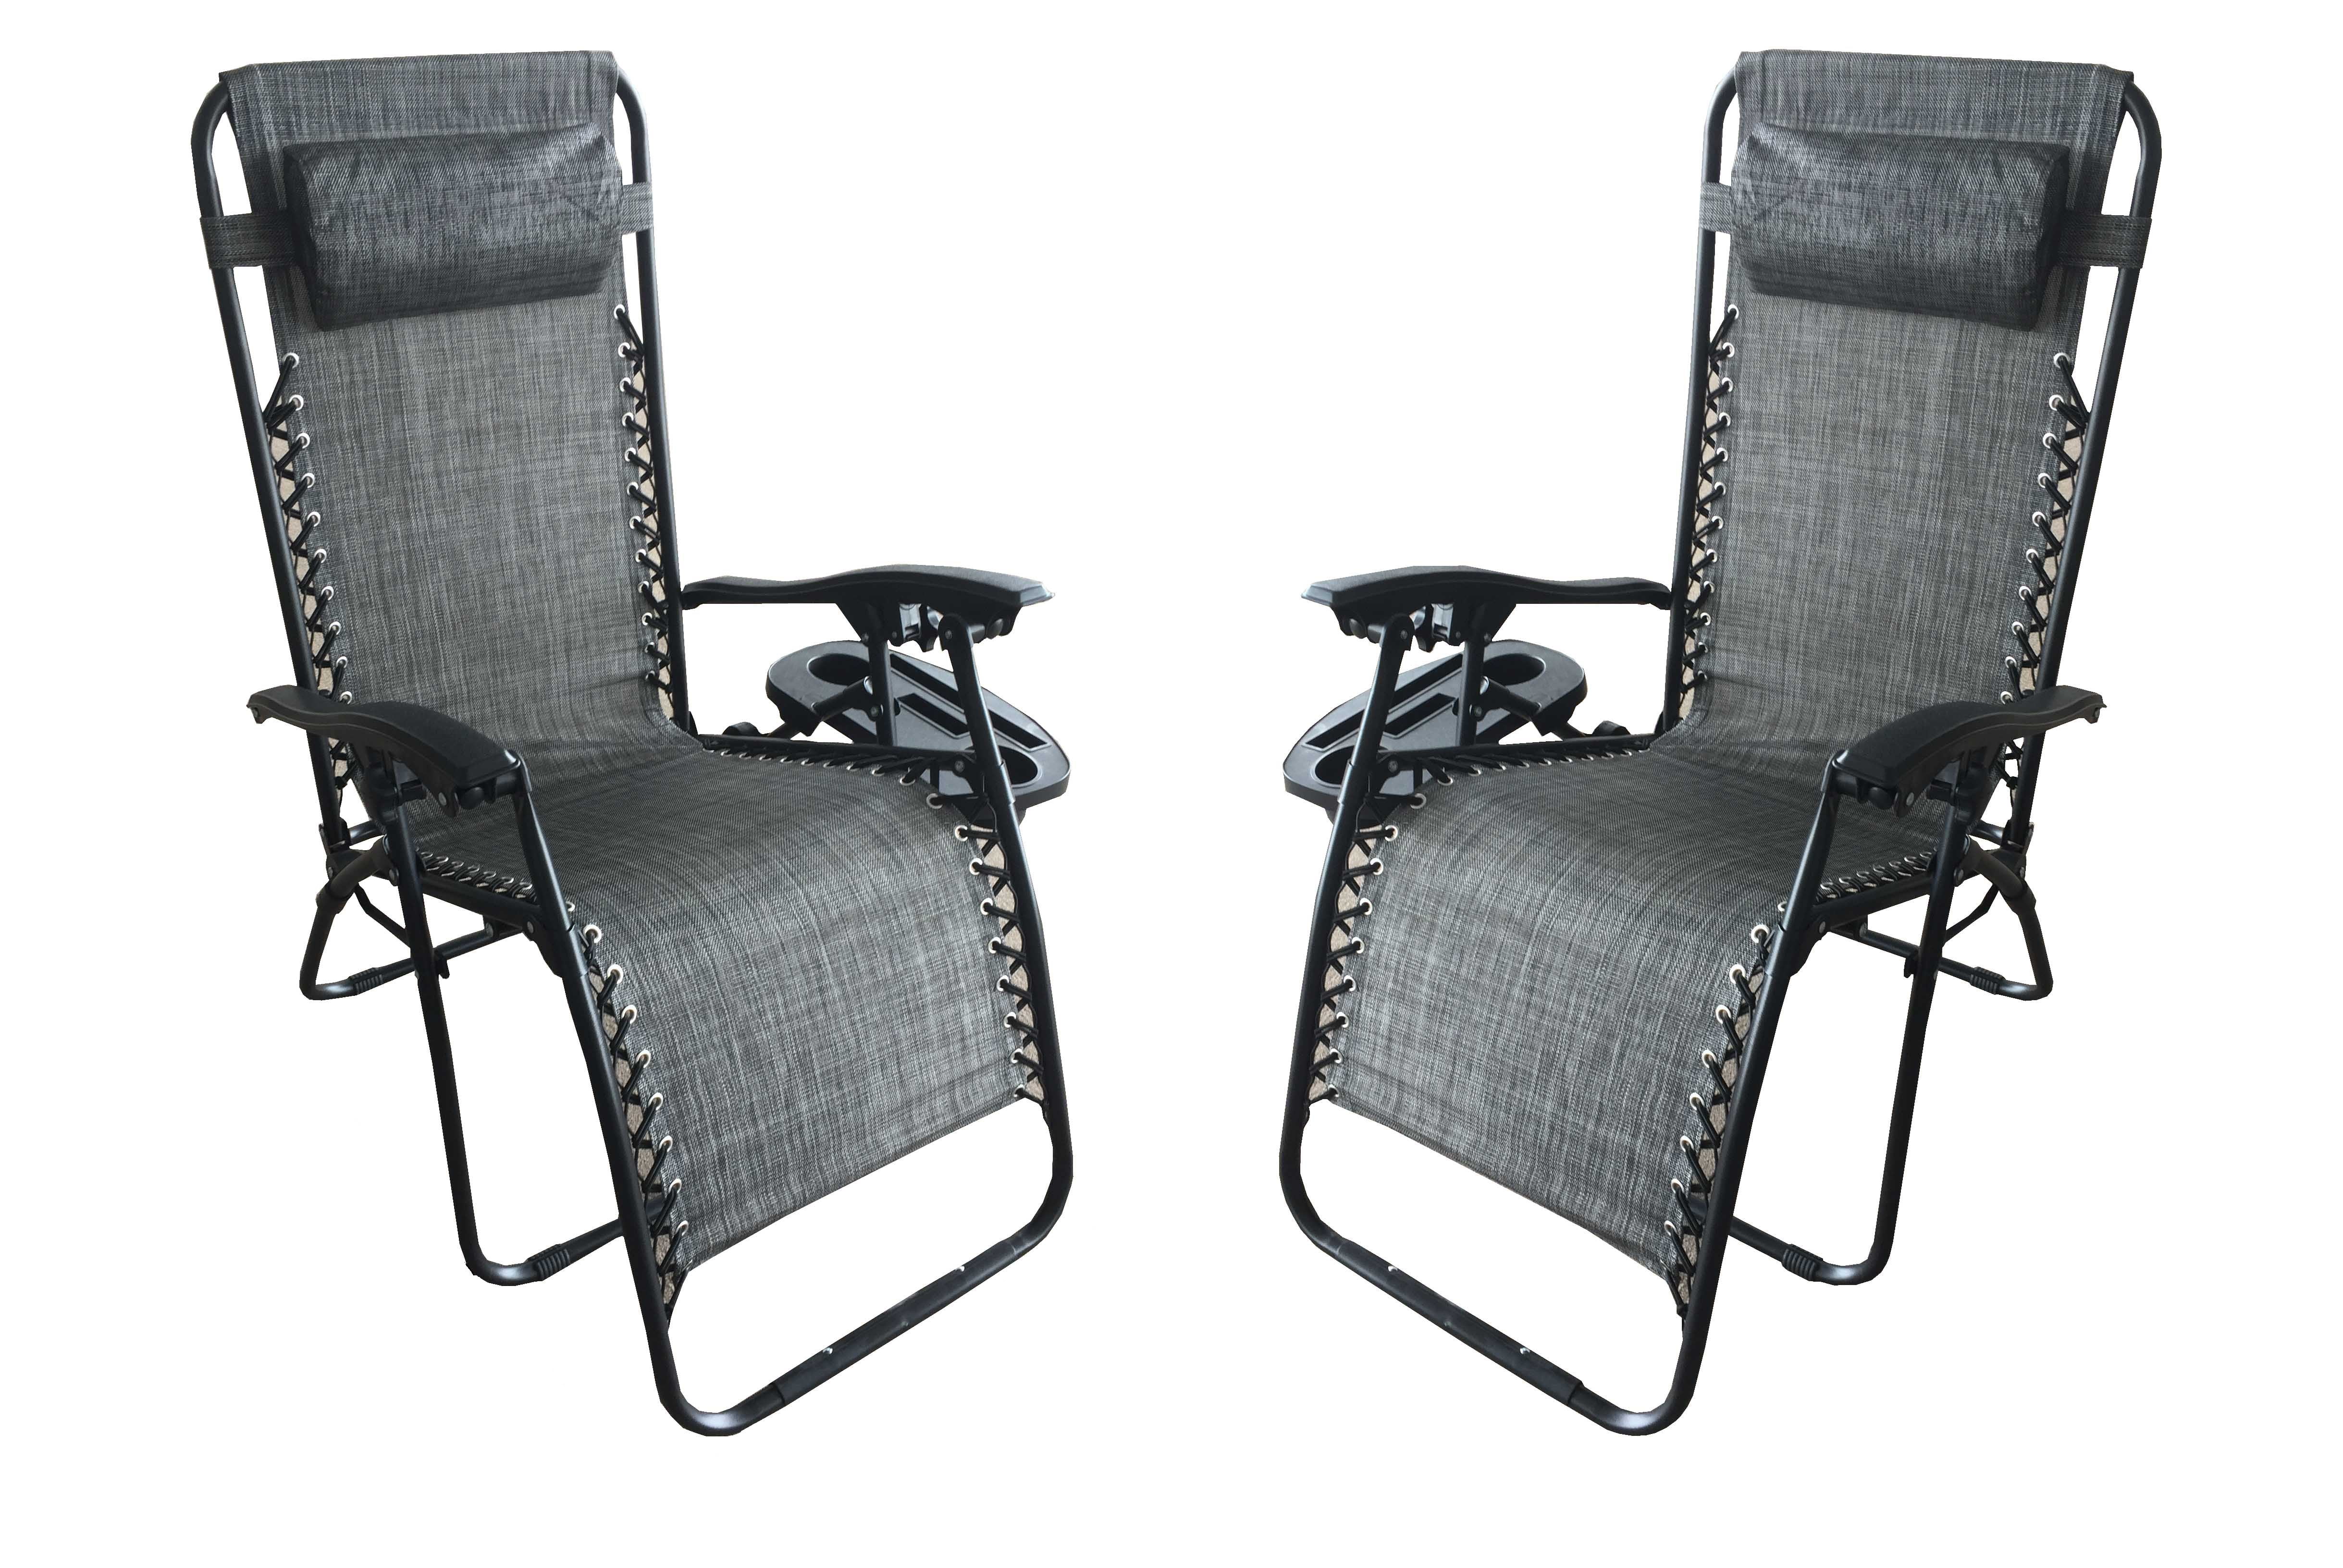 V64001a226 21.75 X 23.75 X 28 In. Zero Gravity Recliner & Lounger With Cup Holder In Grey Mesh Fabric - Pack Of 2